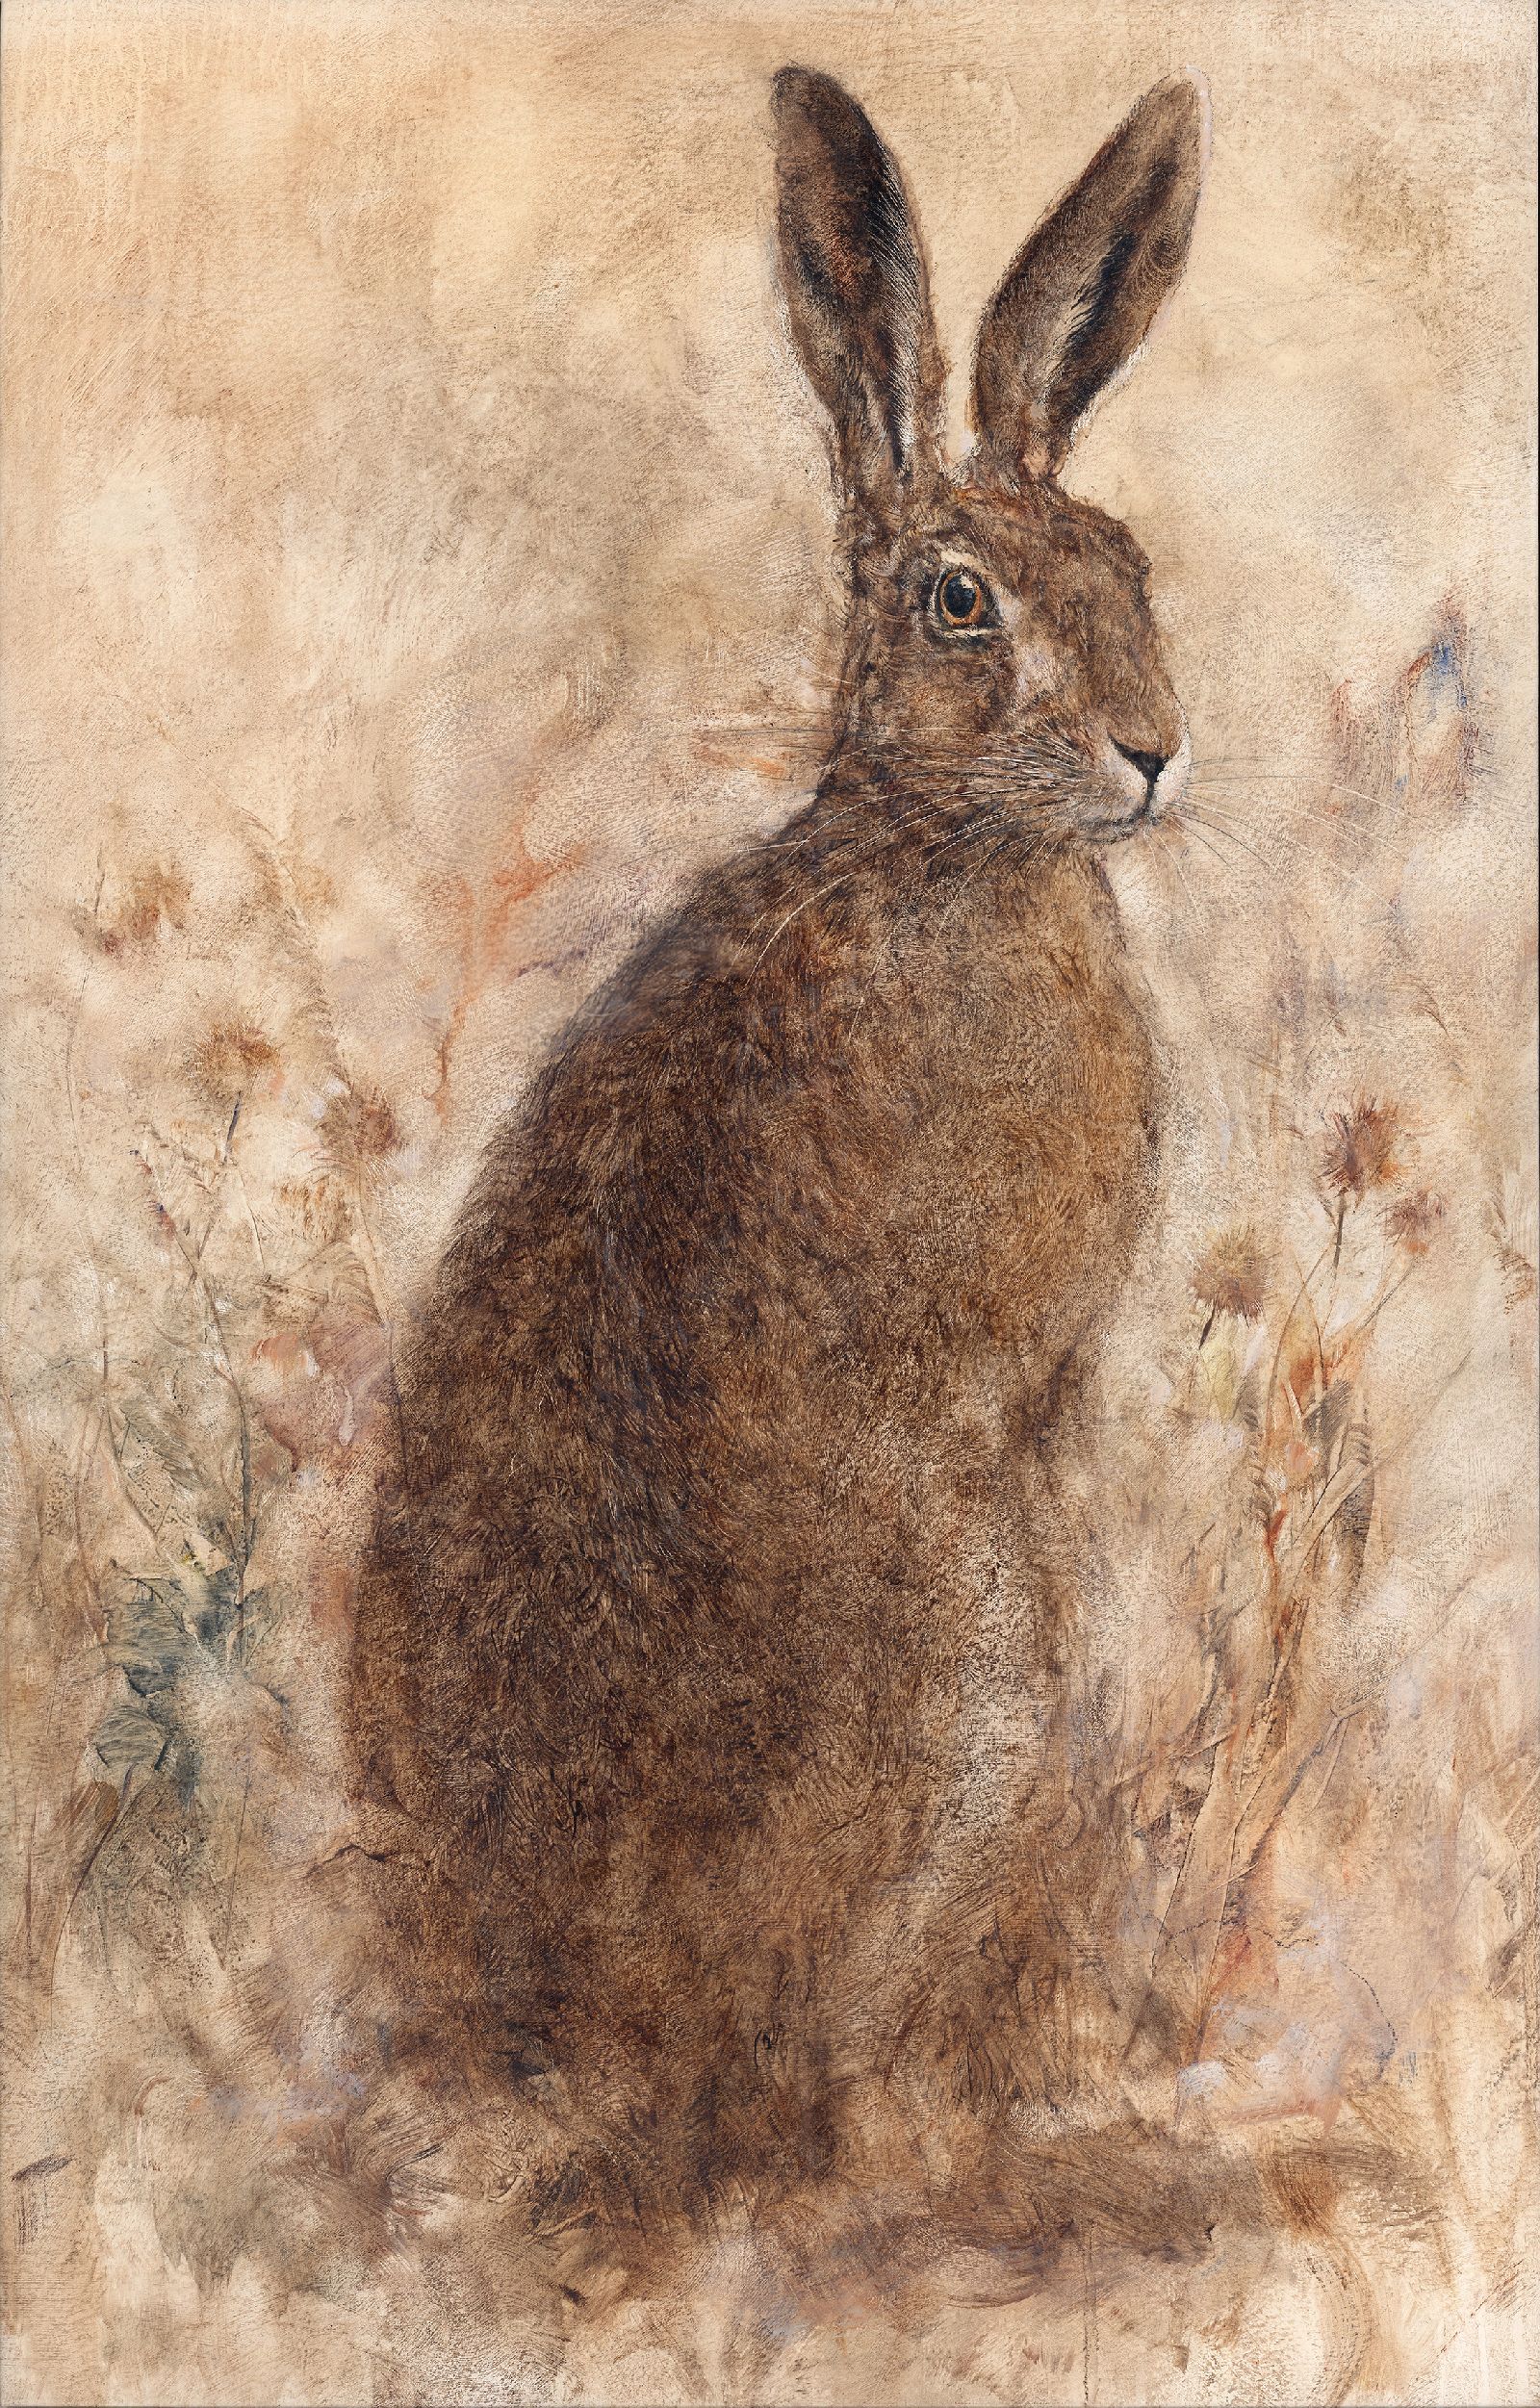 The Curious Hare II by Gary  Benfield